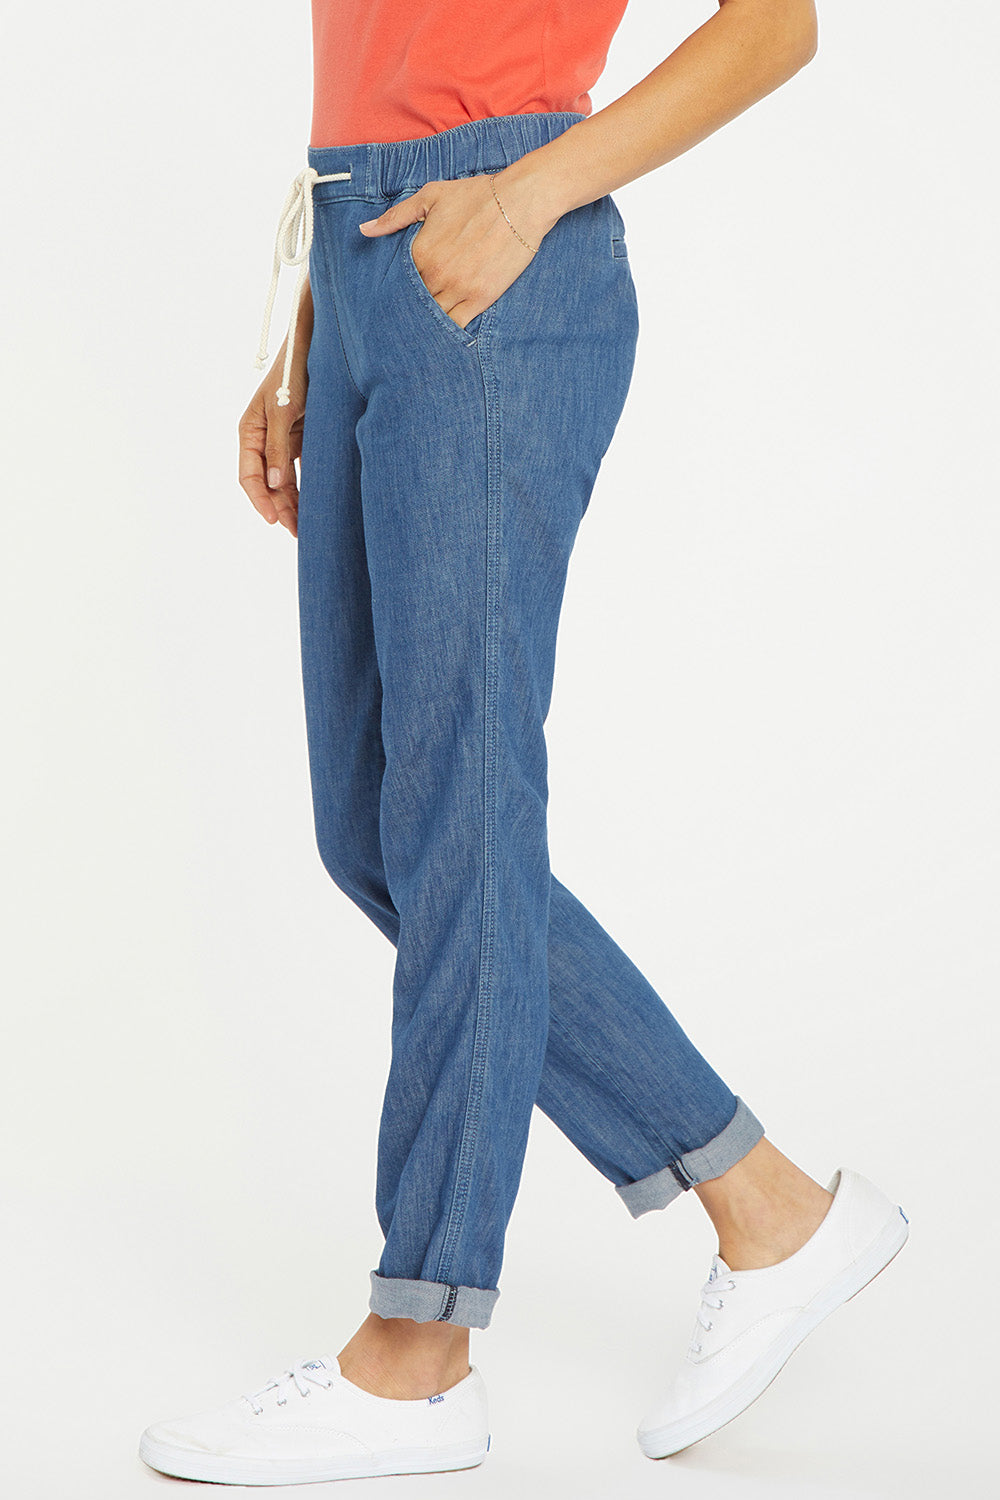 Slim Jogger Ankle Pants In Petite With Roll Cuffs - Horizon Base | NYDJ